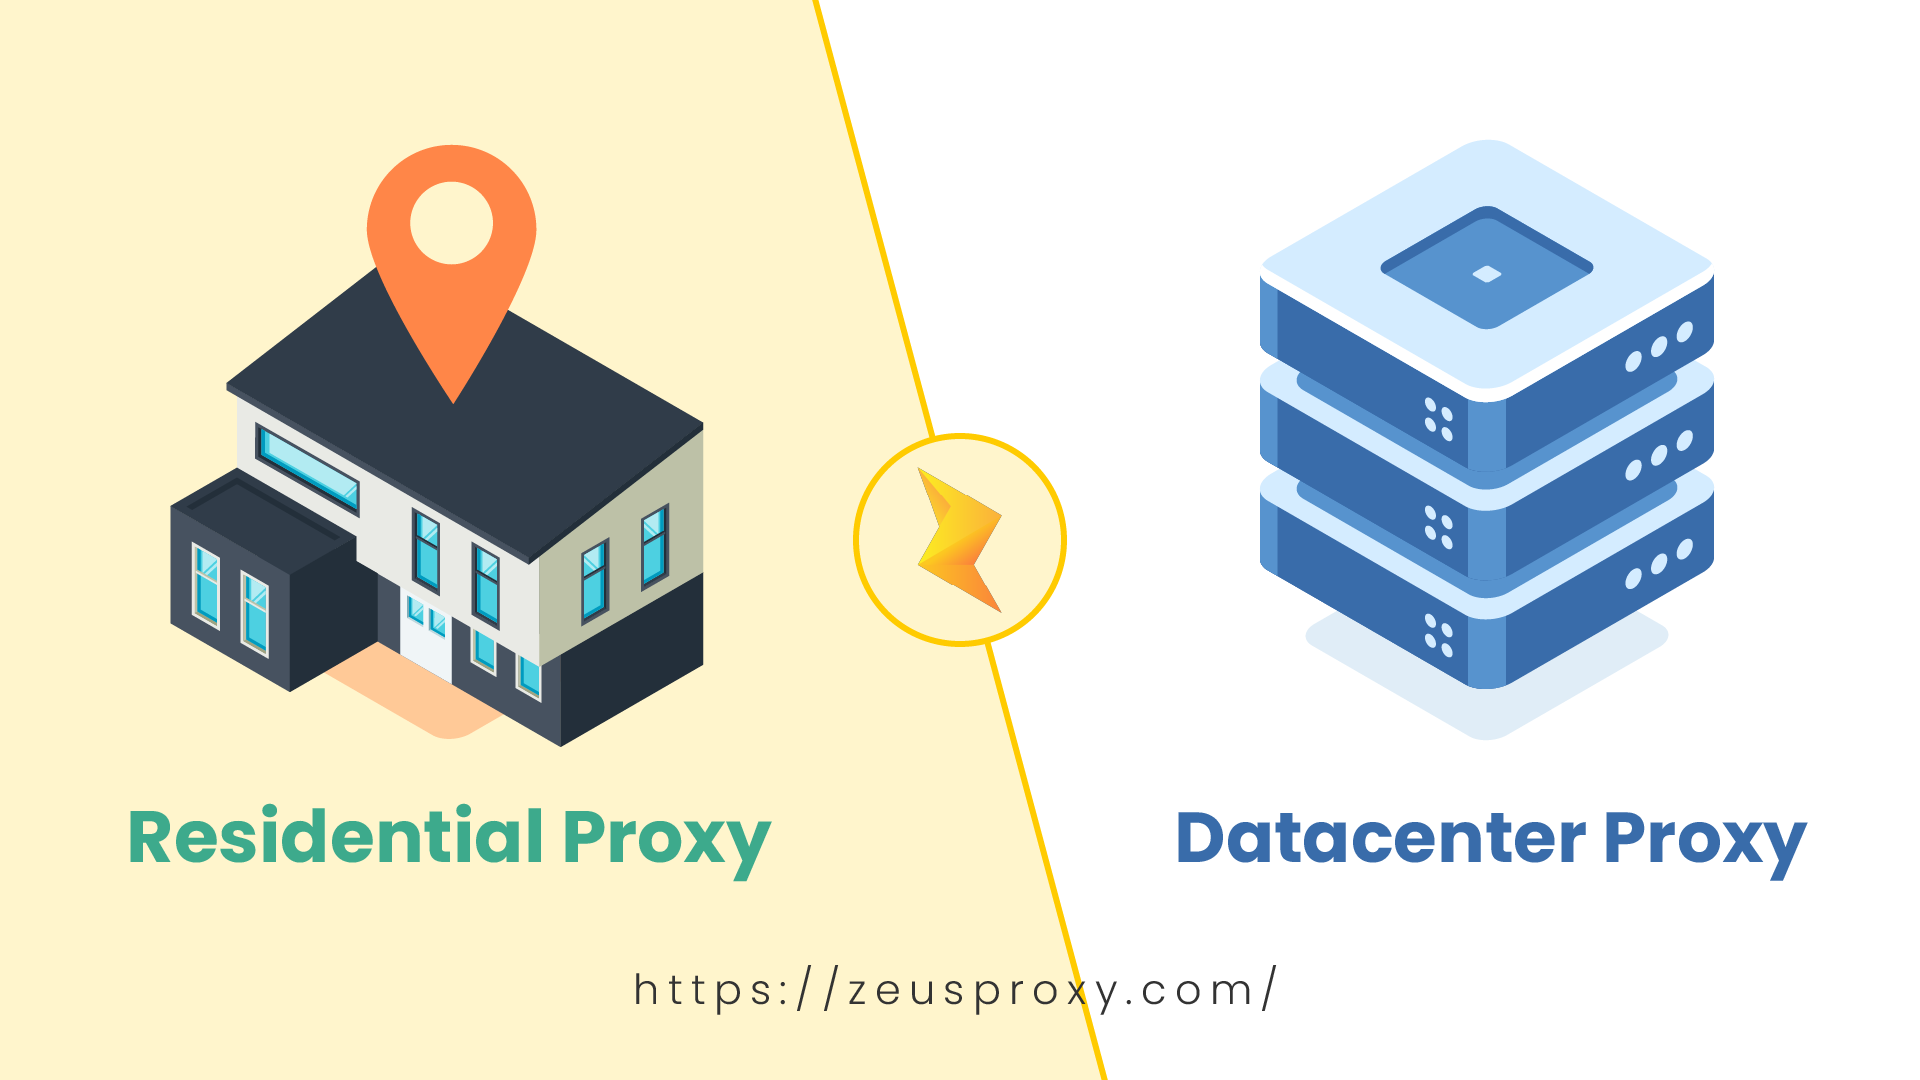 Datacenter and Residential proxies: Which type do you need?